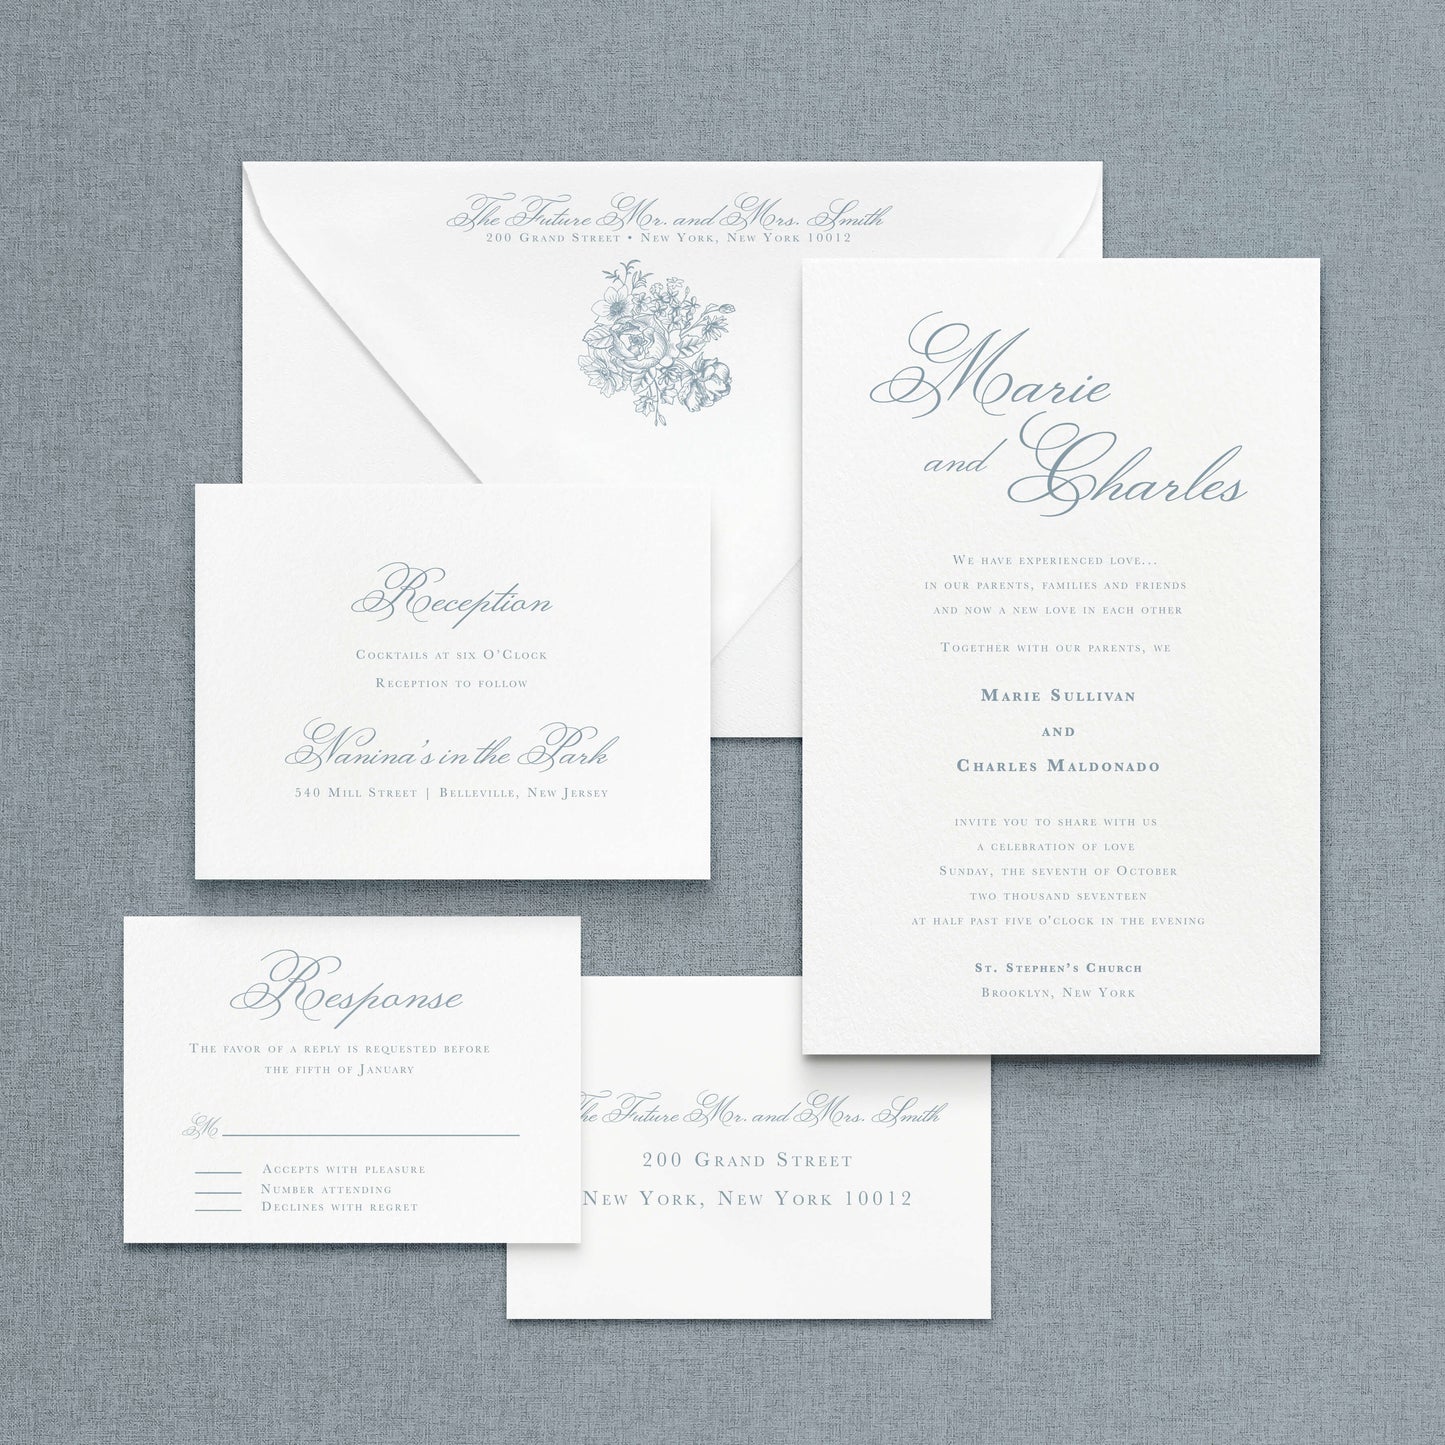 Dusty Blue wedding Invitation Suite including an A9 Invitation Card, A9 envelope, RSVP card, RSVP envelope, and Reception detail card